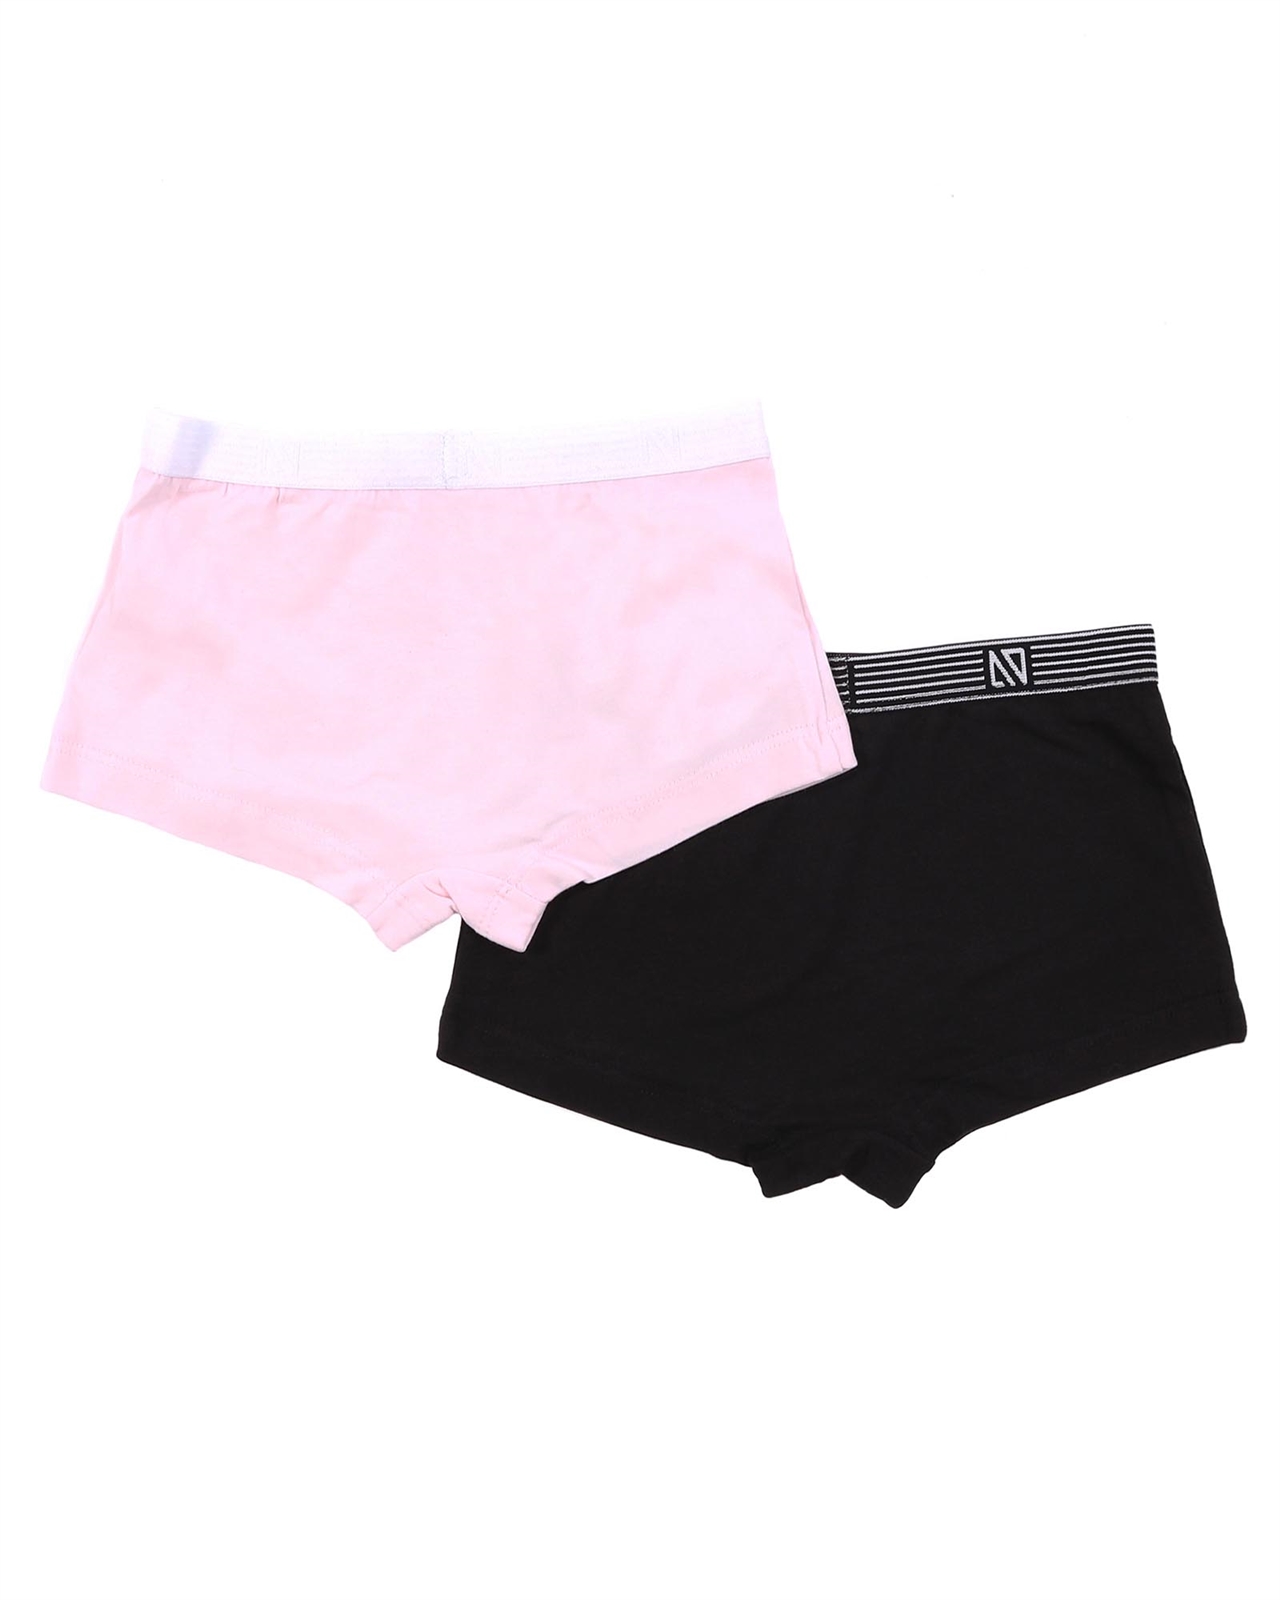 NANO Girls' Two-pack Boxers in Pink/Black, Sizes 6-14